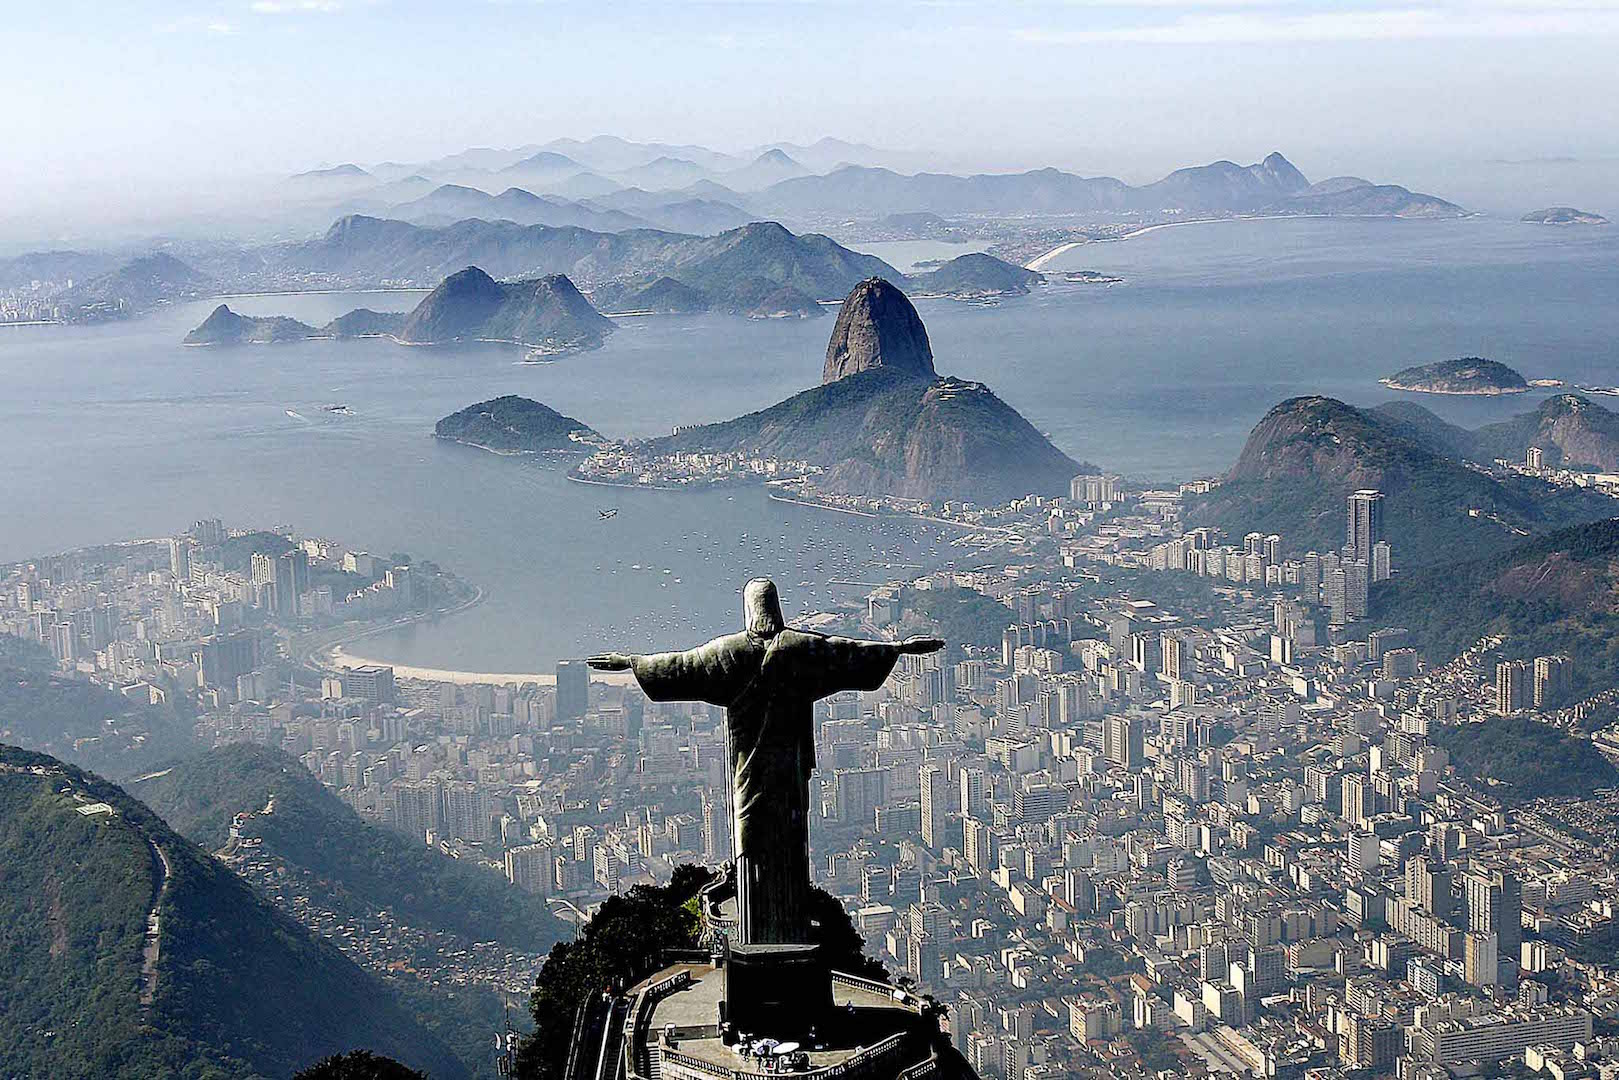 Brazil,Christ the Redeemer and Sugarloaf Mountain in the back are two of the landmarks in Rio with extra security measures during the Olympics,